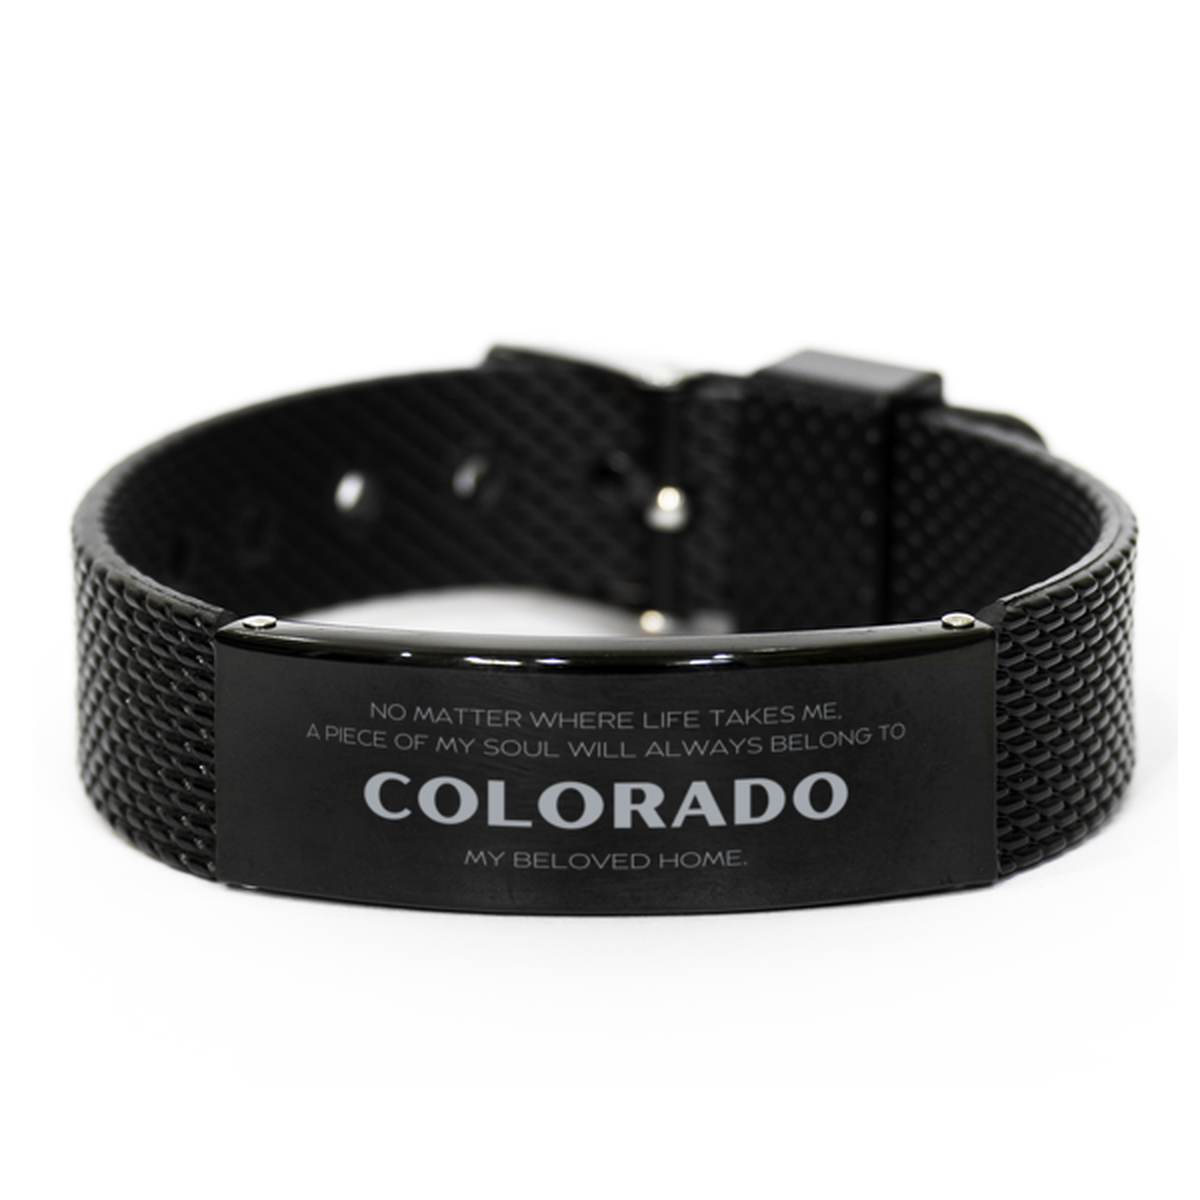 Love Colorado State Gifts, My soul will always belong to Colorado, Proud Black Shark Mesh Bracelet, Birthday Unique Gifts For Colorado Men, Women, Friends